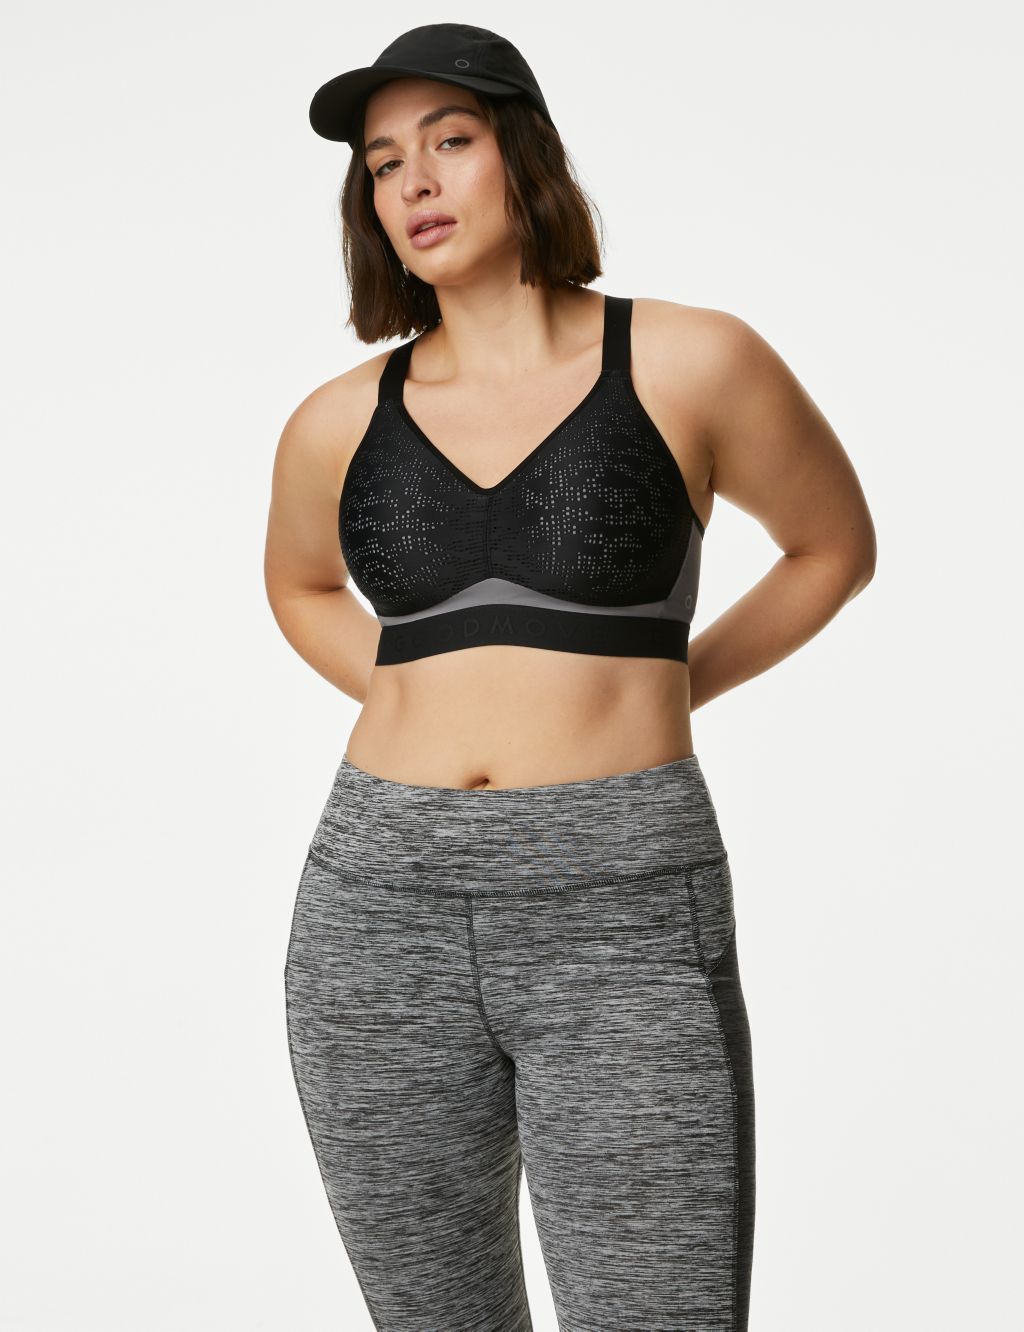 M&S ANGEL SPORTS Girls NON WIRED HIGH IMPACT SPORTS BRA In CARBON GREY Size  34AA £9.99 - PicClick UK